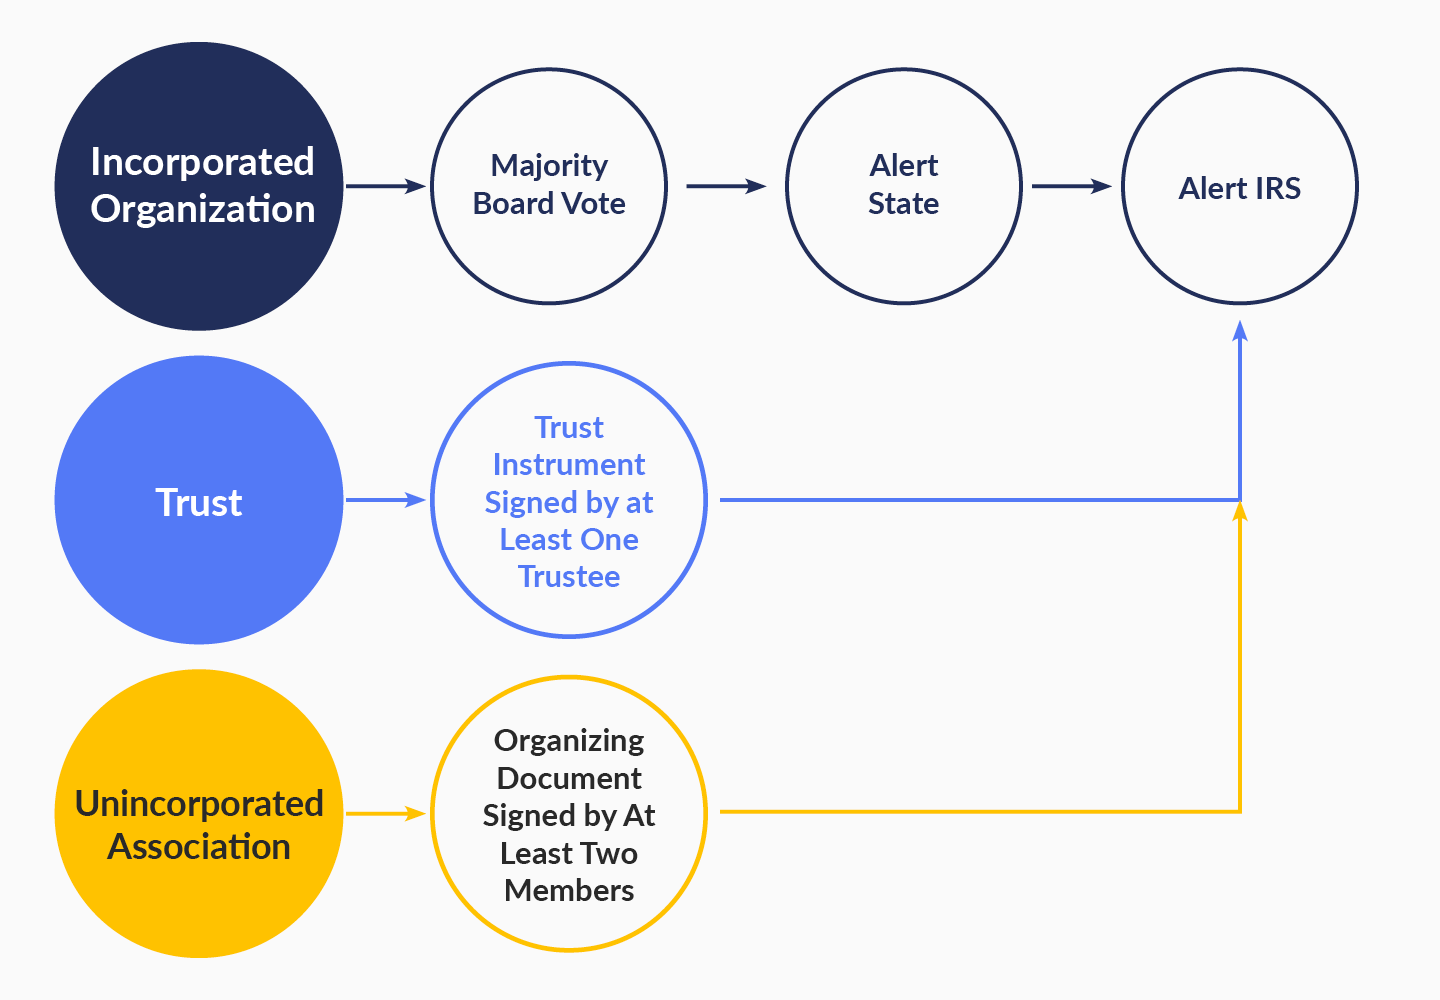 The following infographic shows the steps incorporated organizations, trusts, and unincorporated associations must take to change their names. The steps are detailed below.